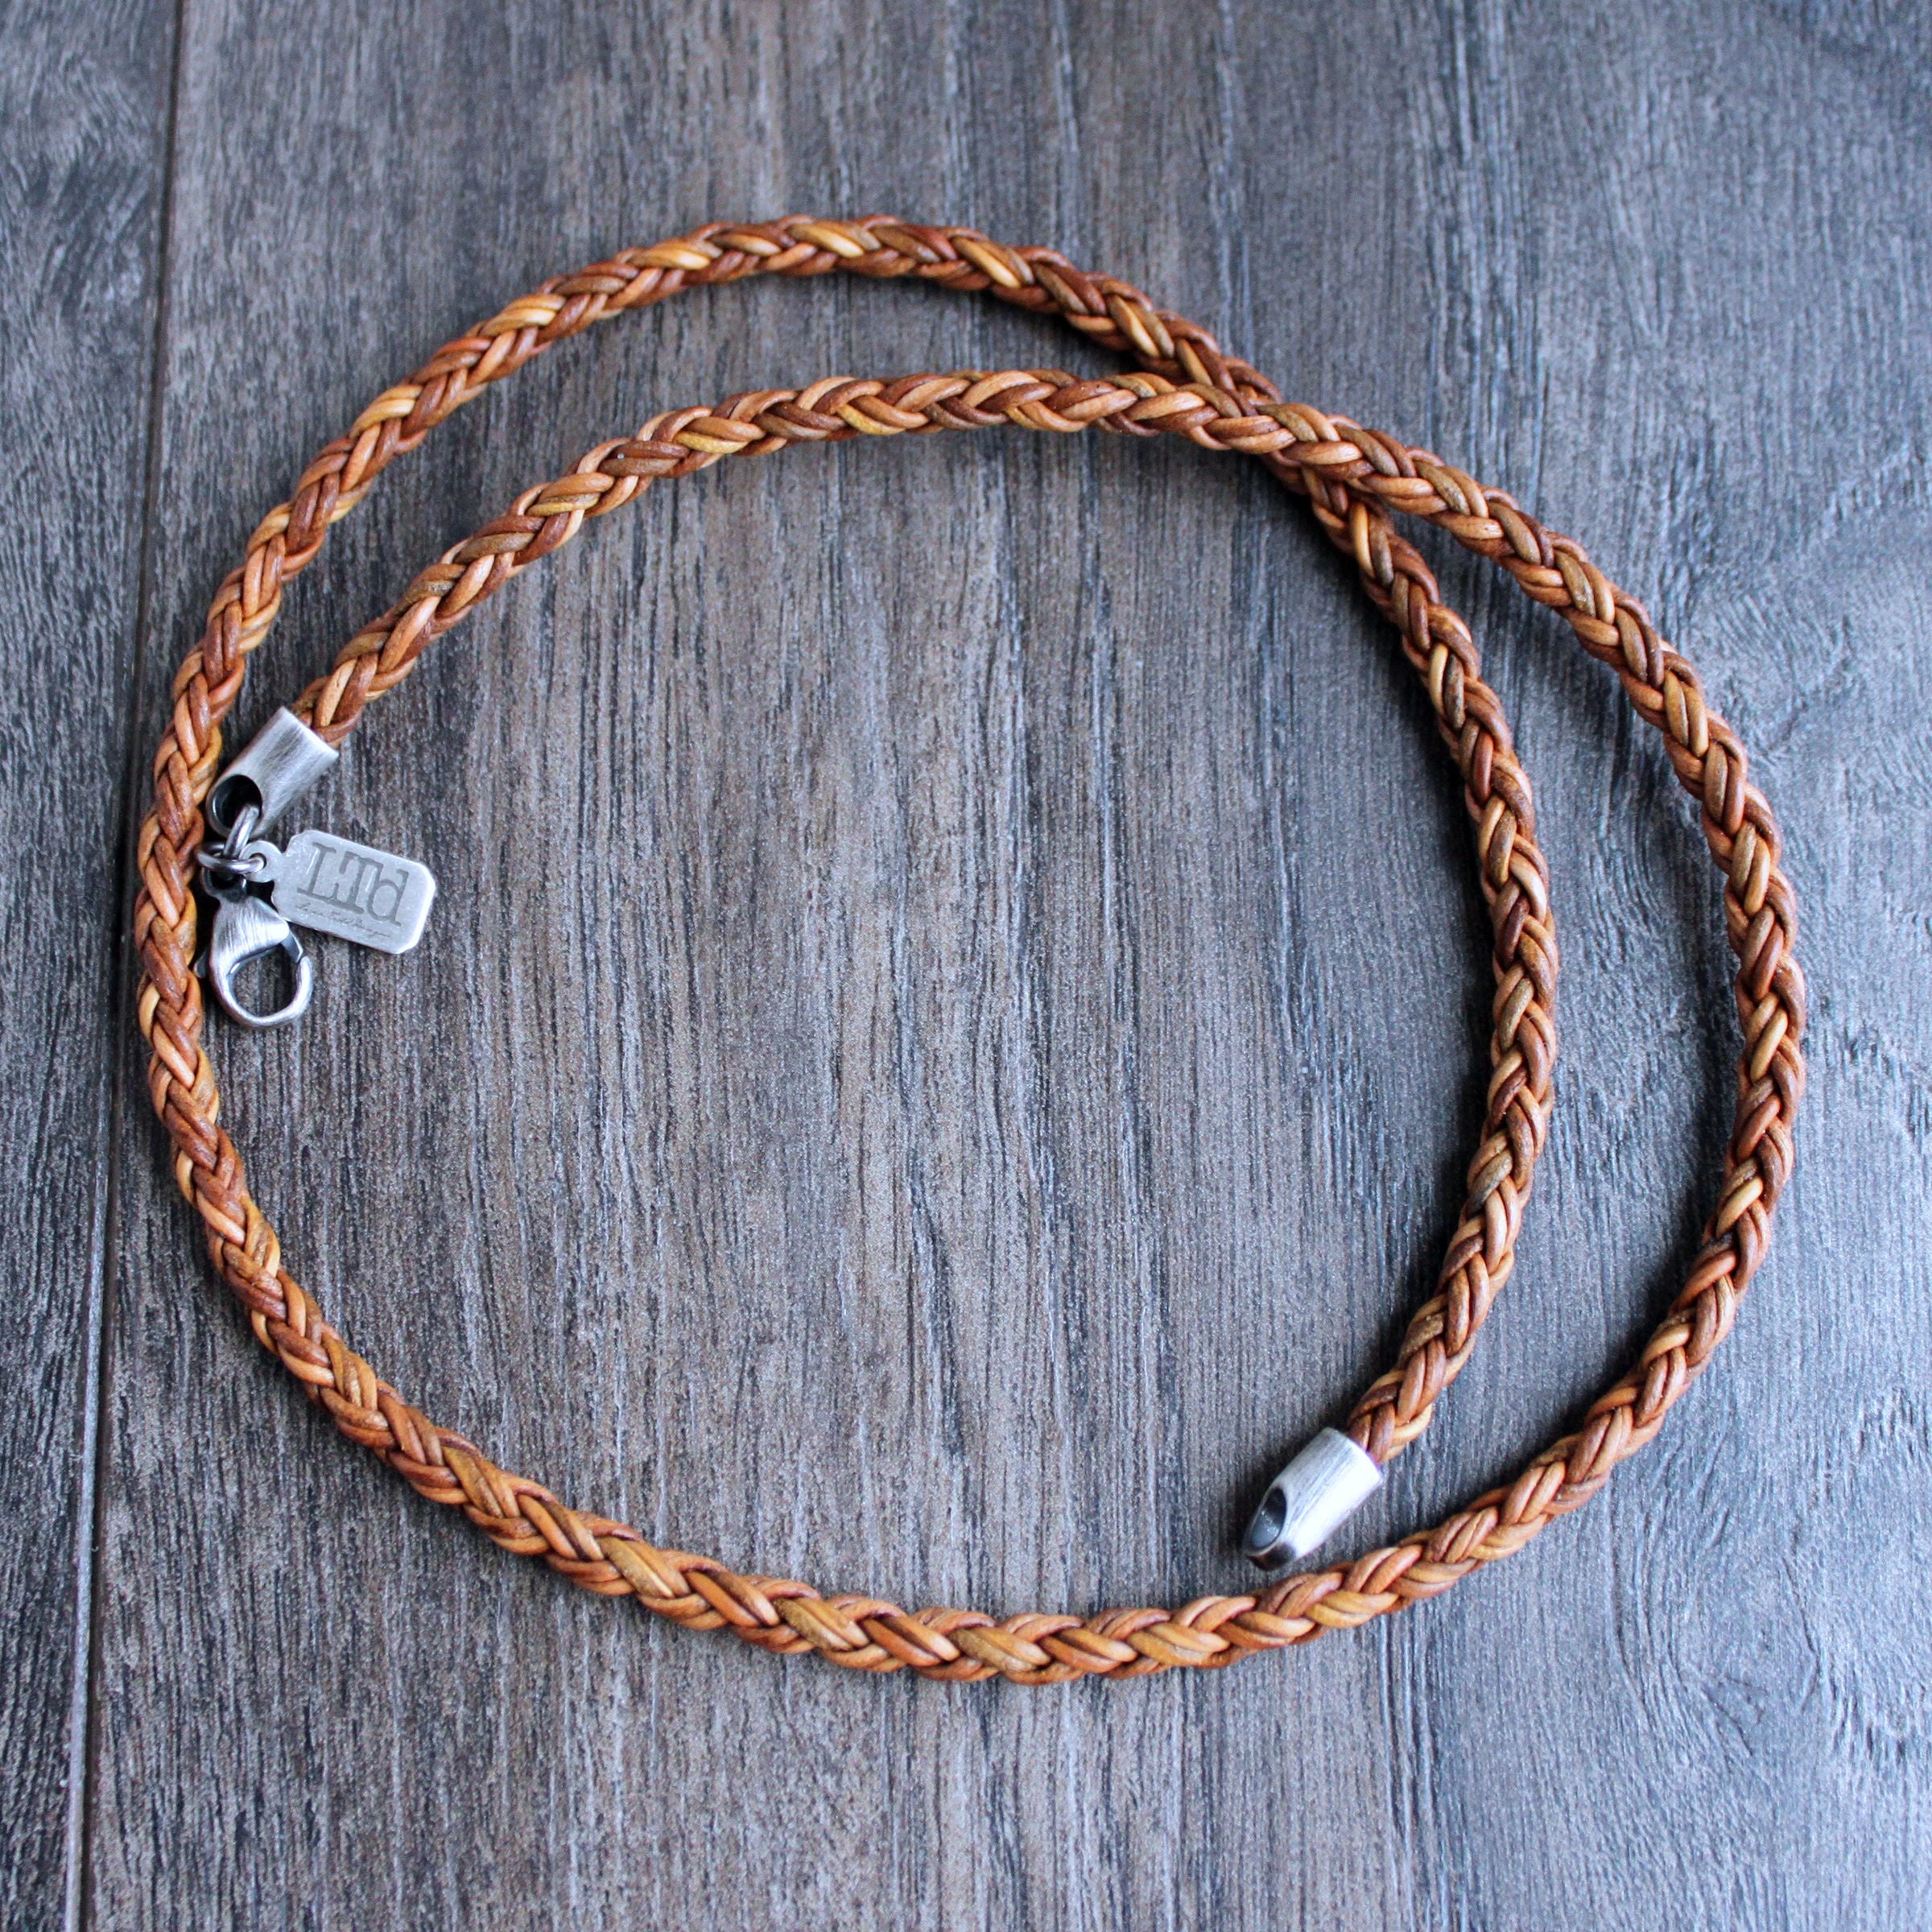 DIY Nautical Knot Rope Necklace - Handmade in the Heartland